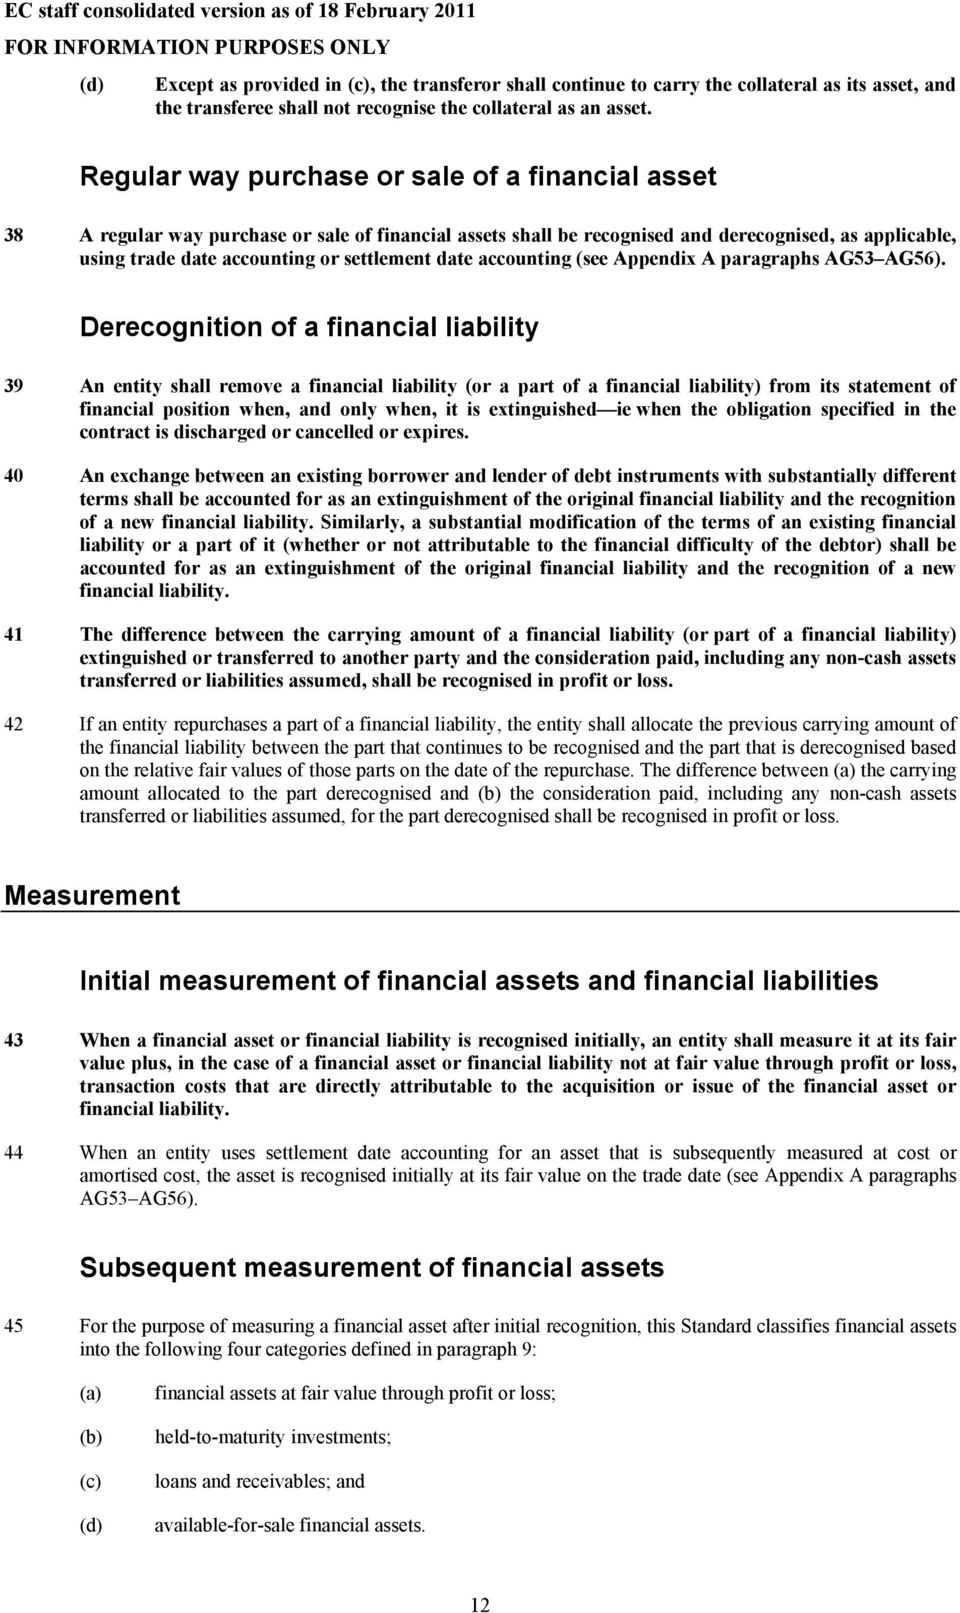 Regular way purchase or sale of a financial asset 38 A regular way purchase or sale of financial assets shall be recognised and derecognised, as applicable, using trade date accounting or settlement